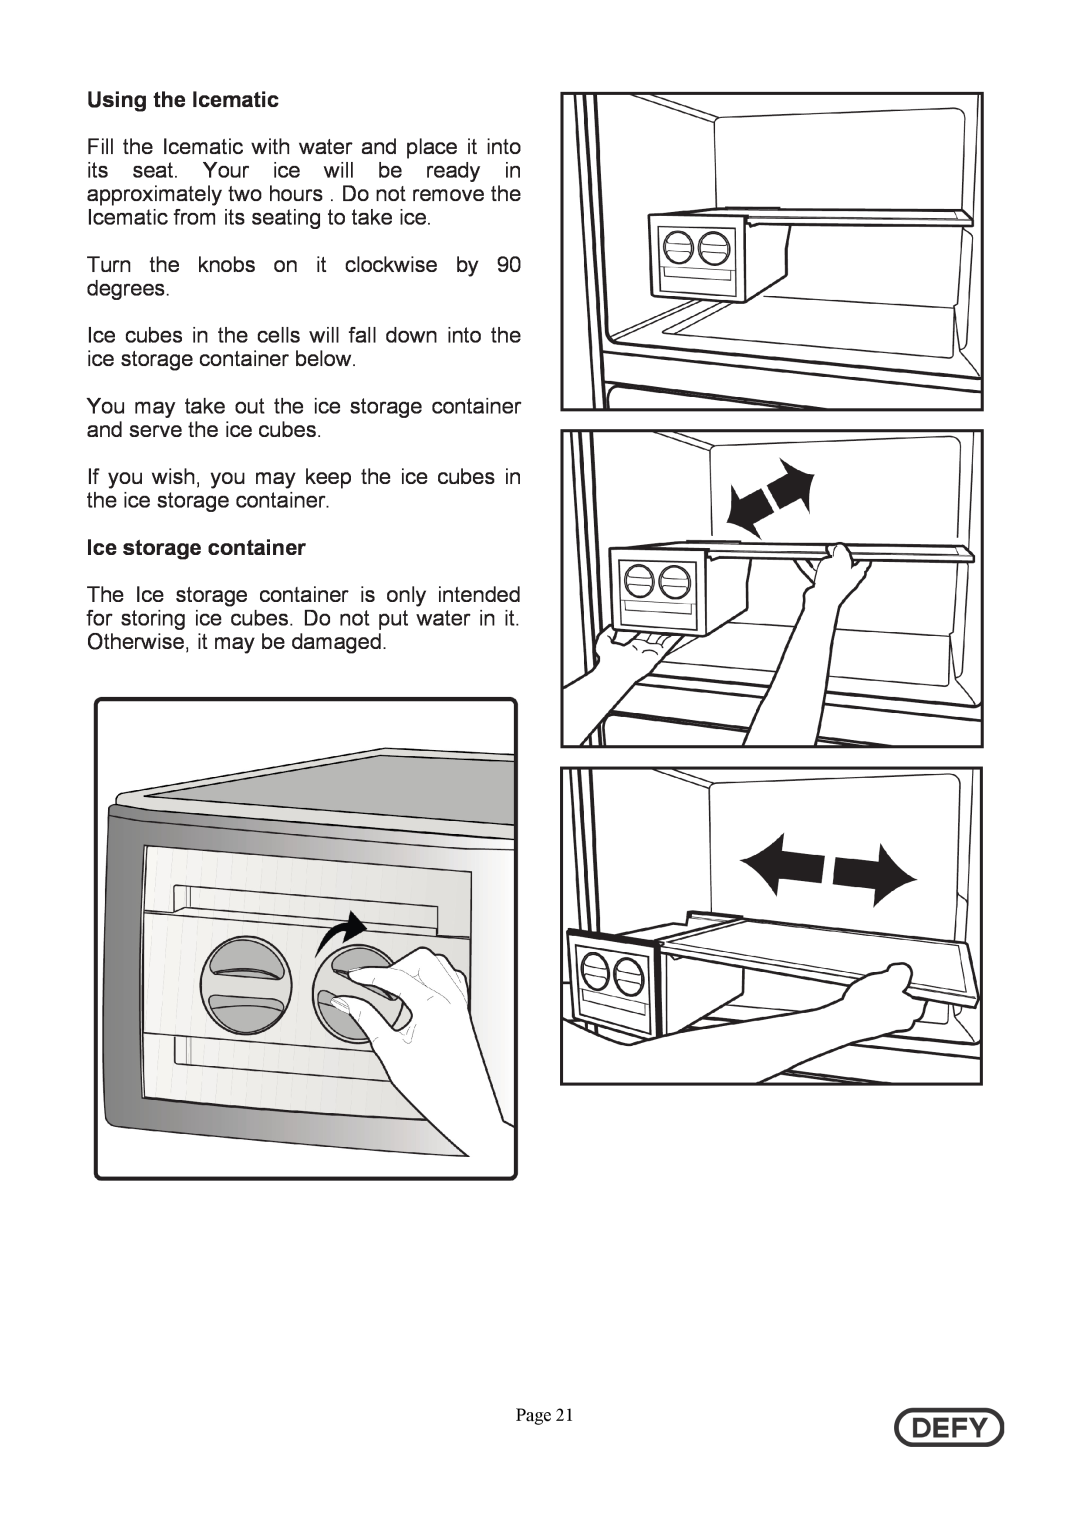 Defy Appliances DFD442 instruction manual Using the Icematic, Ice storage container 